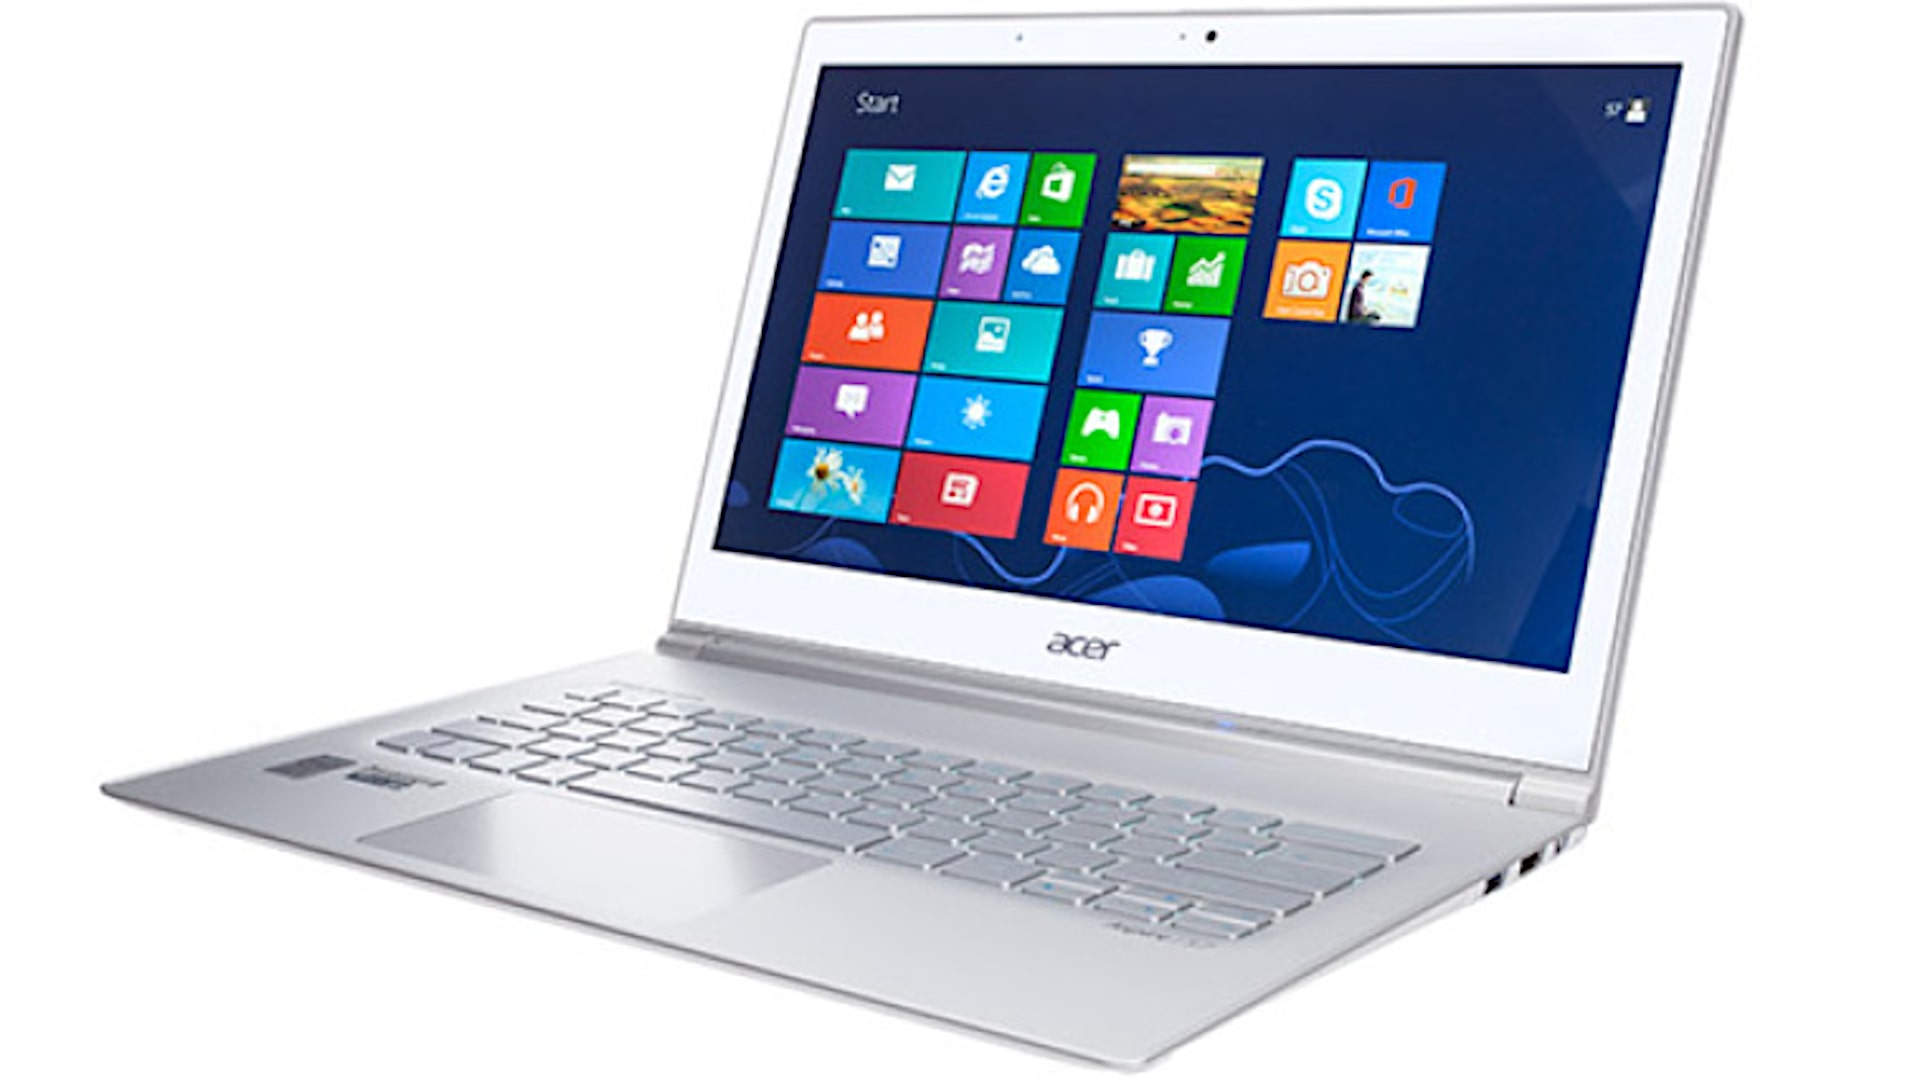 Acer Aspire S7 392 6411 Right Side